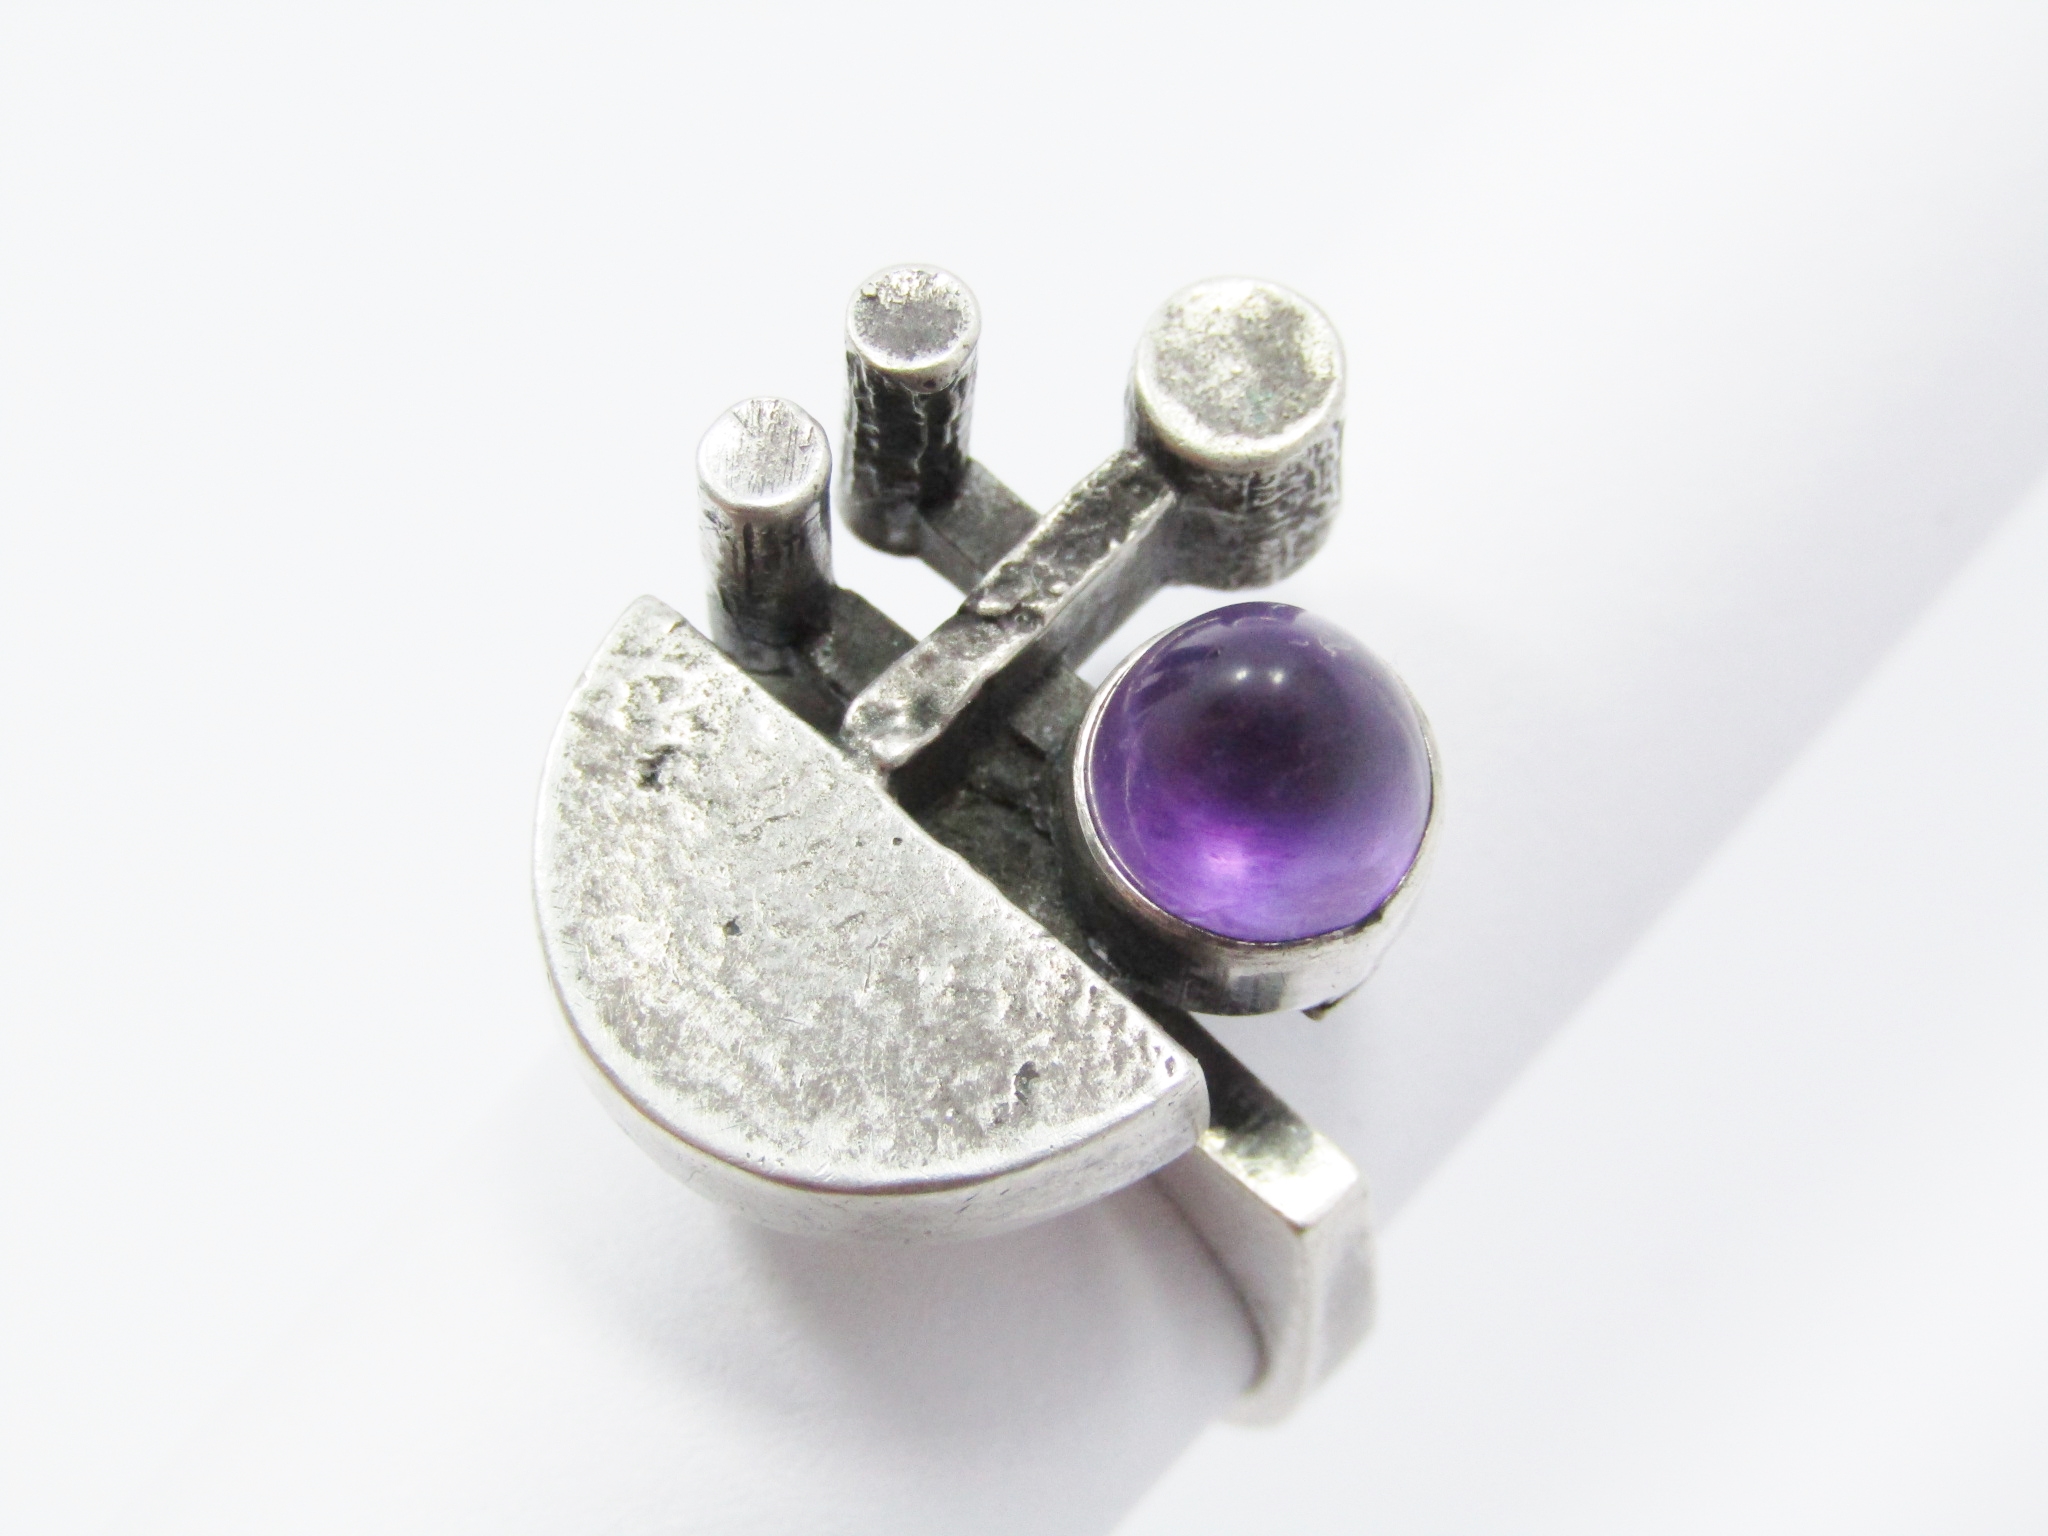 A Gorgeous German Modernist Design Ring With a Amethyst Stone In Sterling Silver.